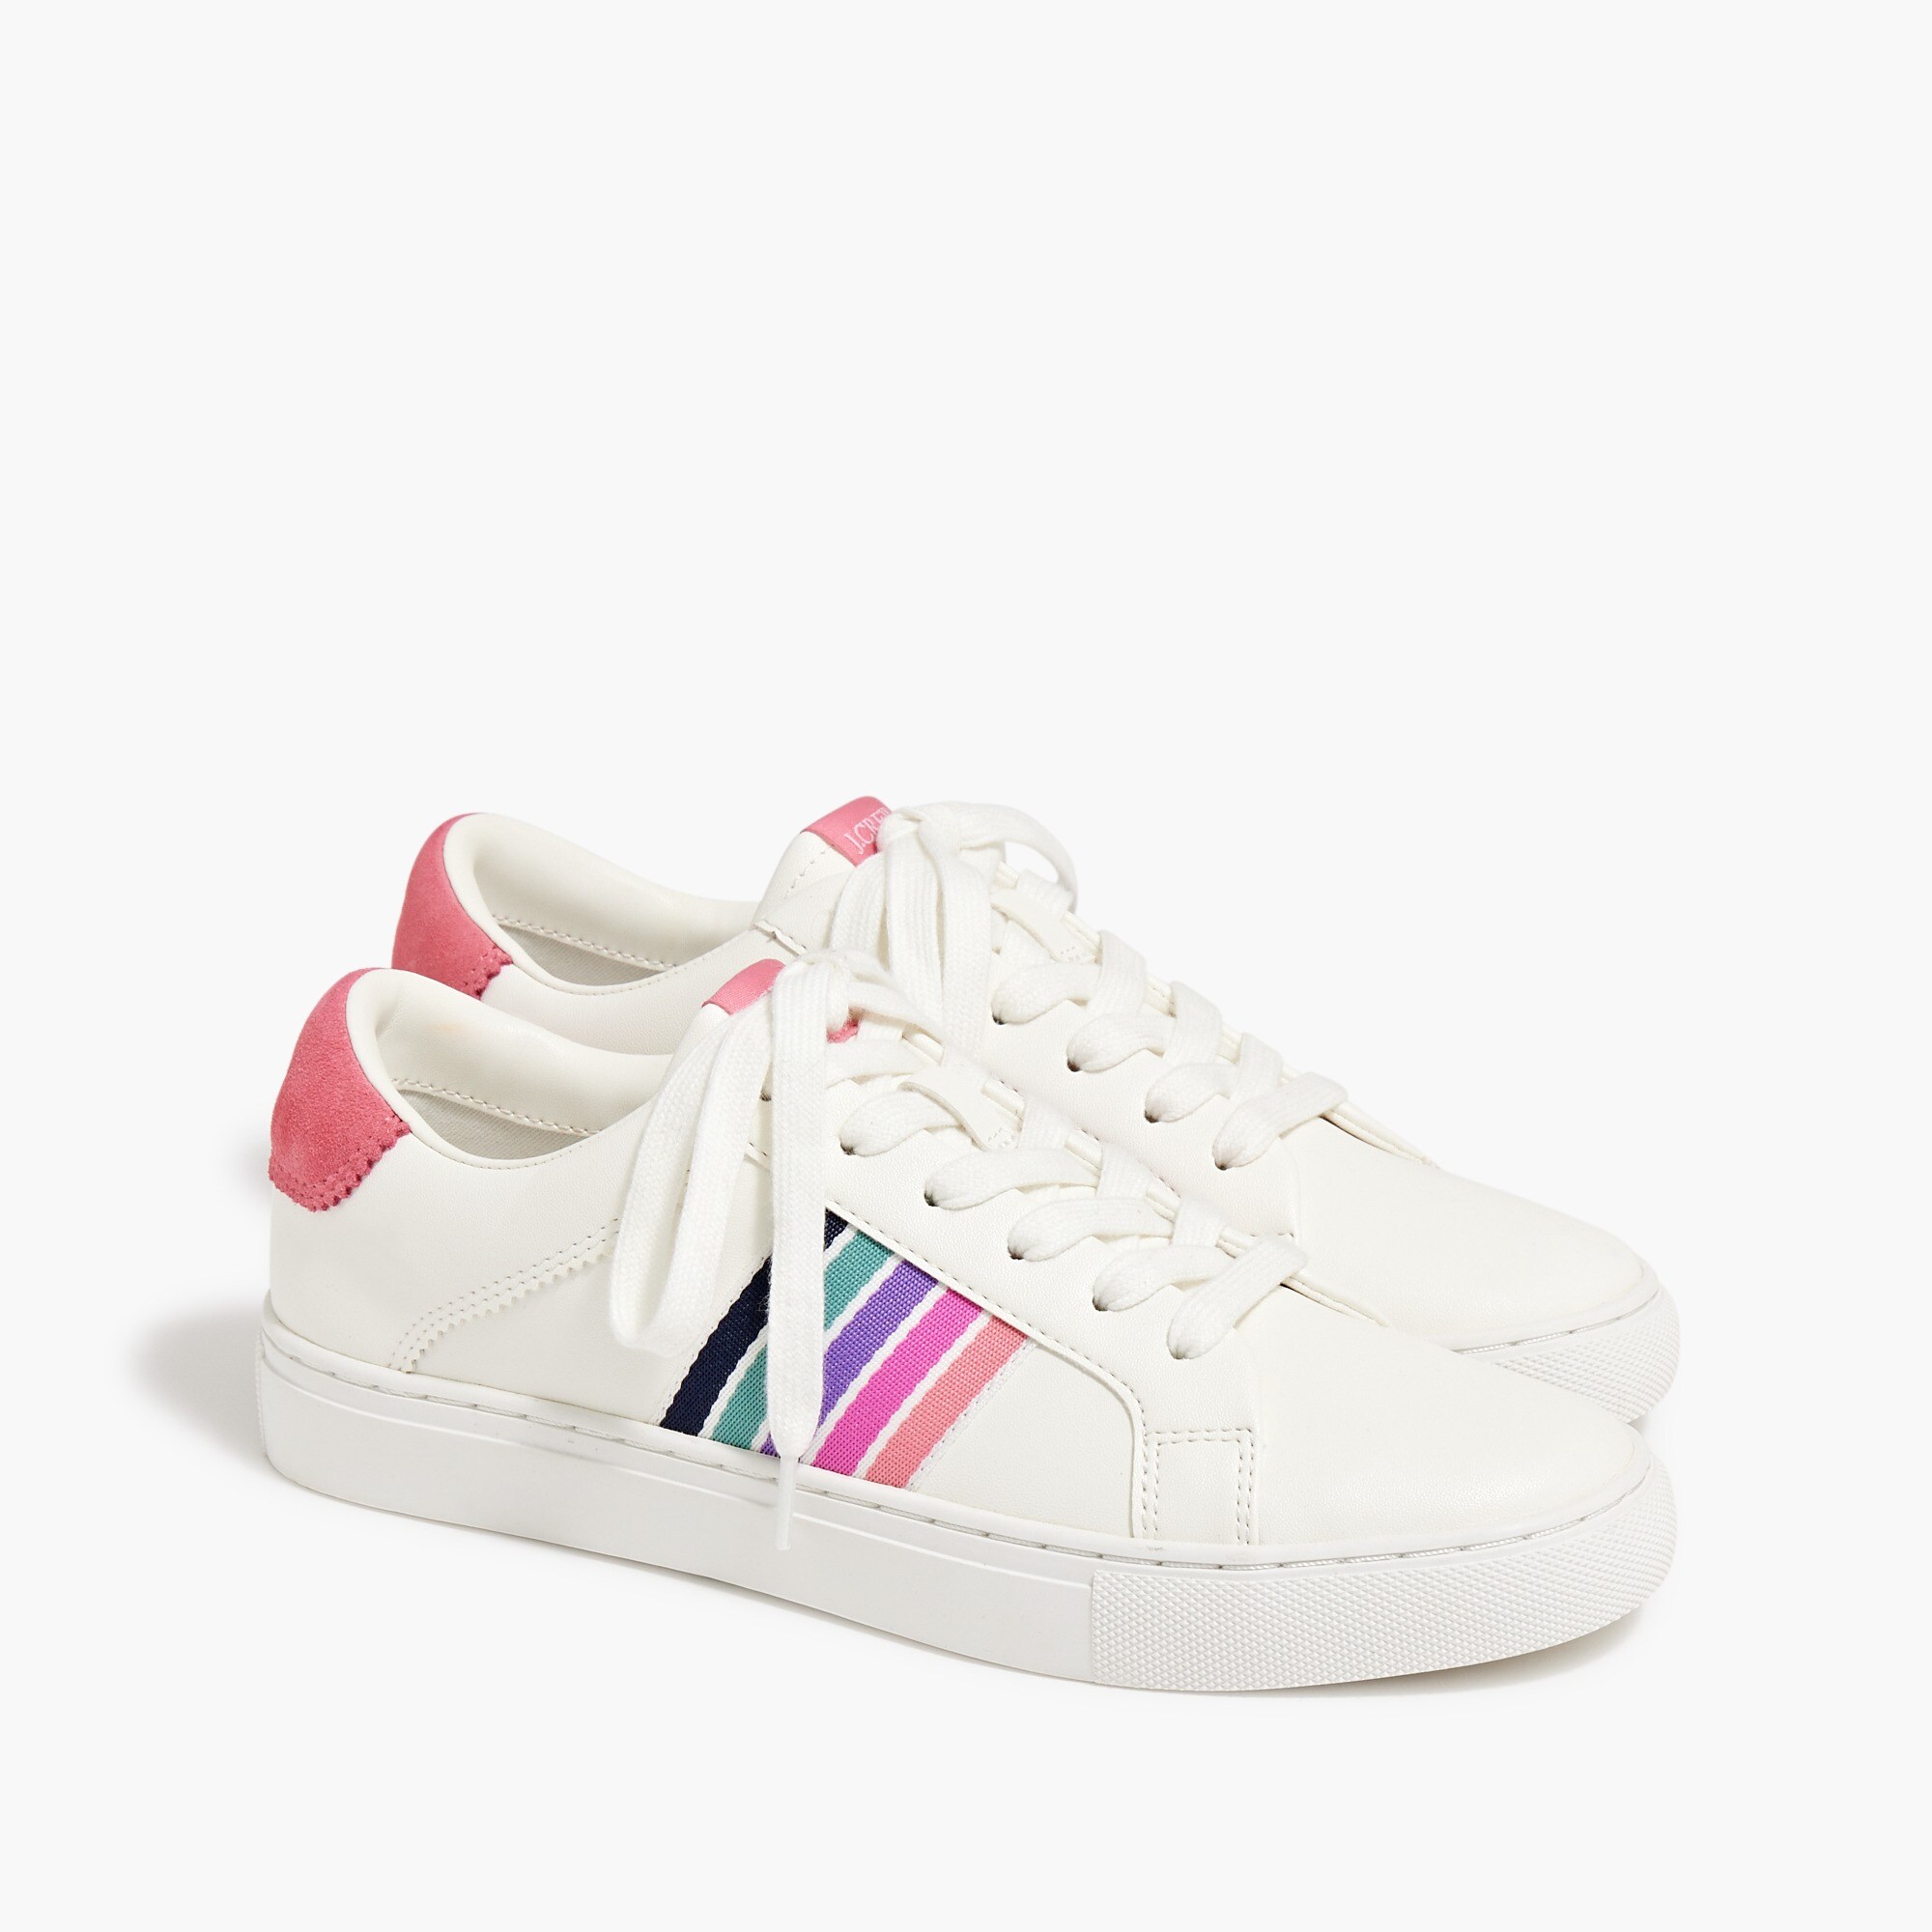  Striped lace-up sneakers